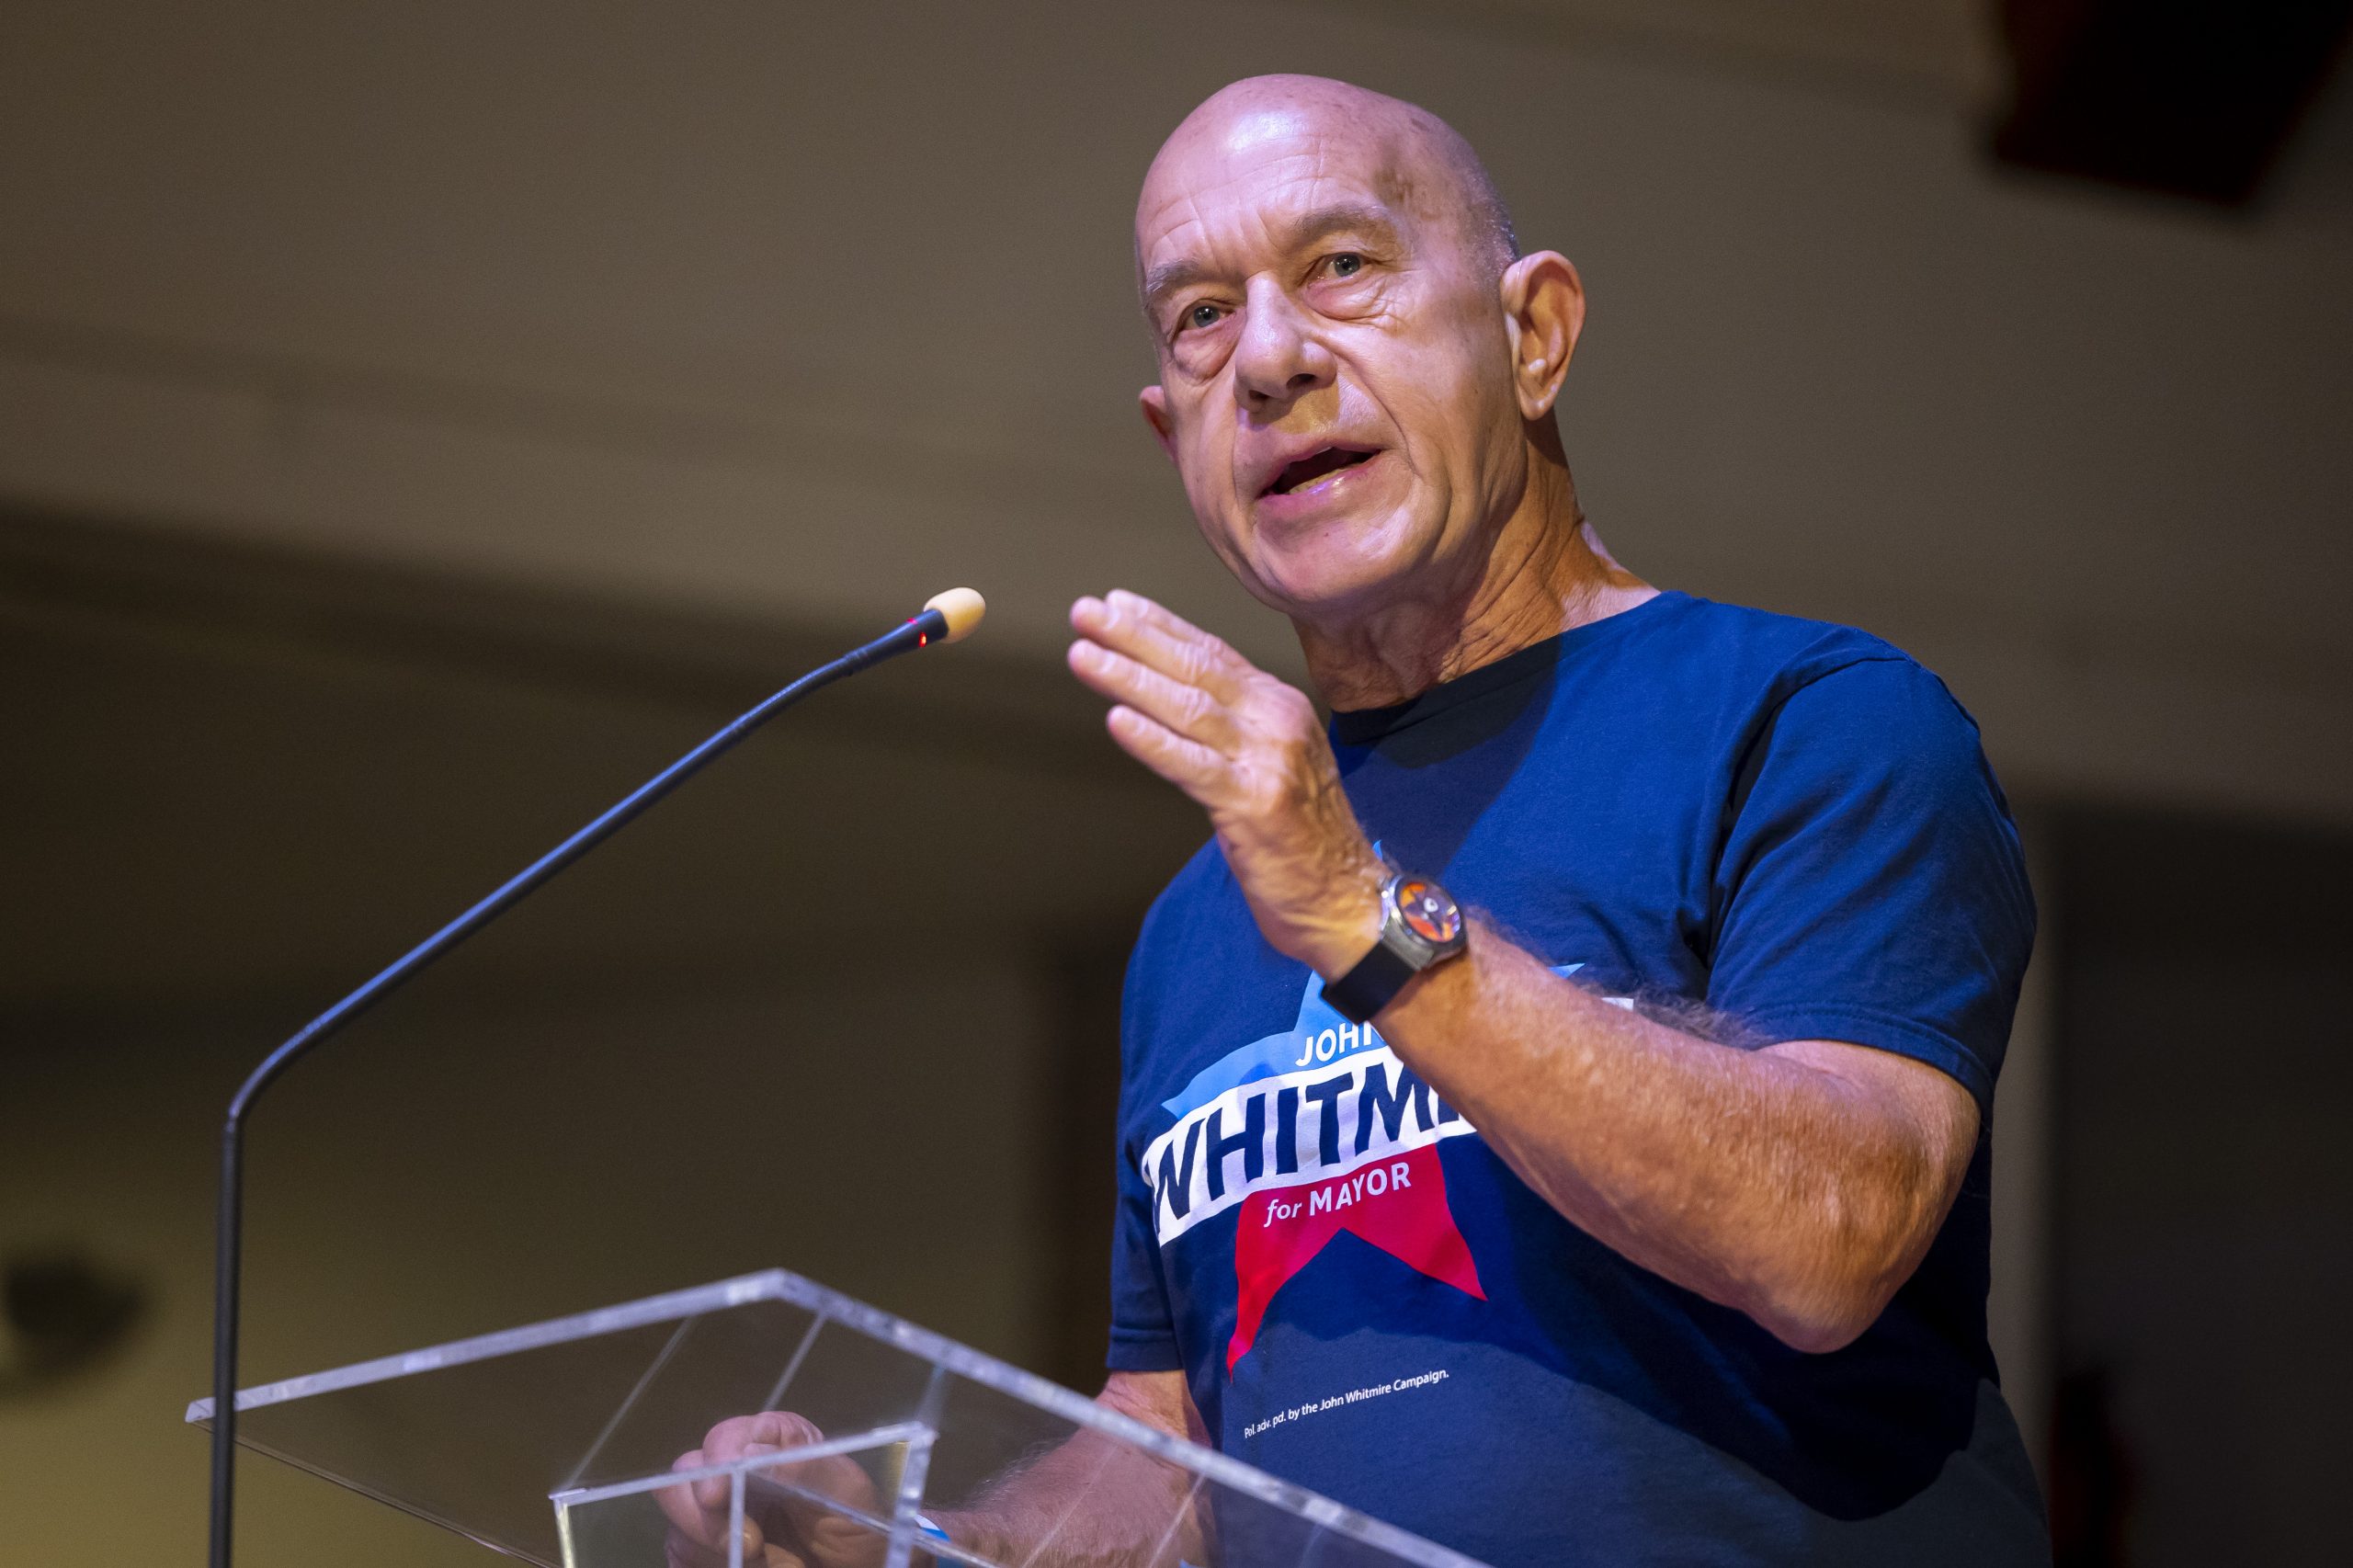 Mayoral candidate and state Sen. John Whitmire, D-Houston, shown here in early September, has used the proceeds of campaign investments to boost the finances of his mayoral run. Two of his opponents have asked the city attorney to investigate, saying it violates city campaign rules.